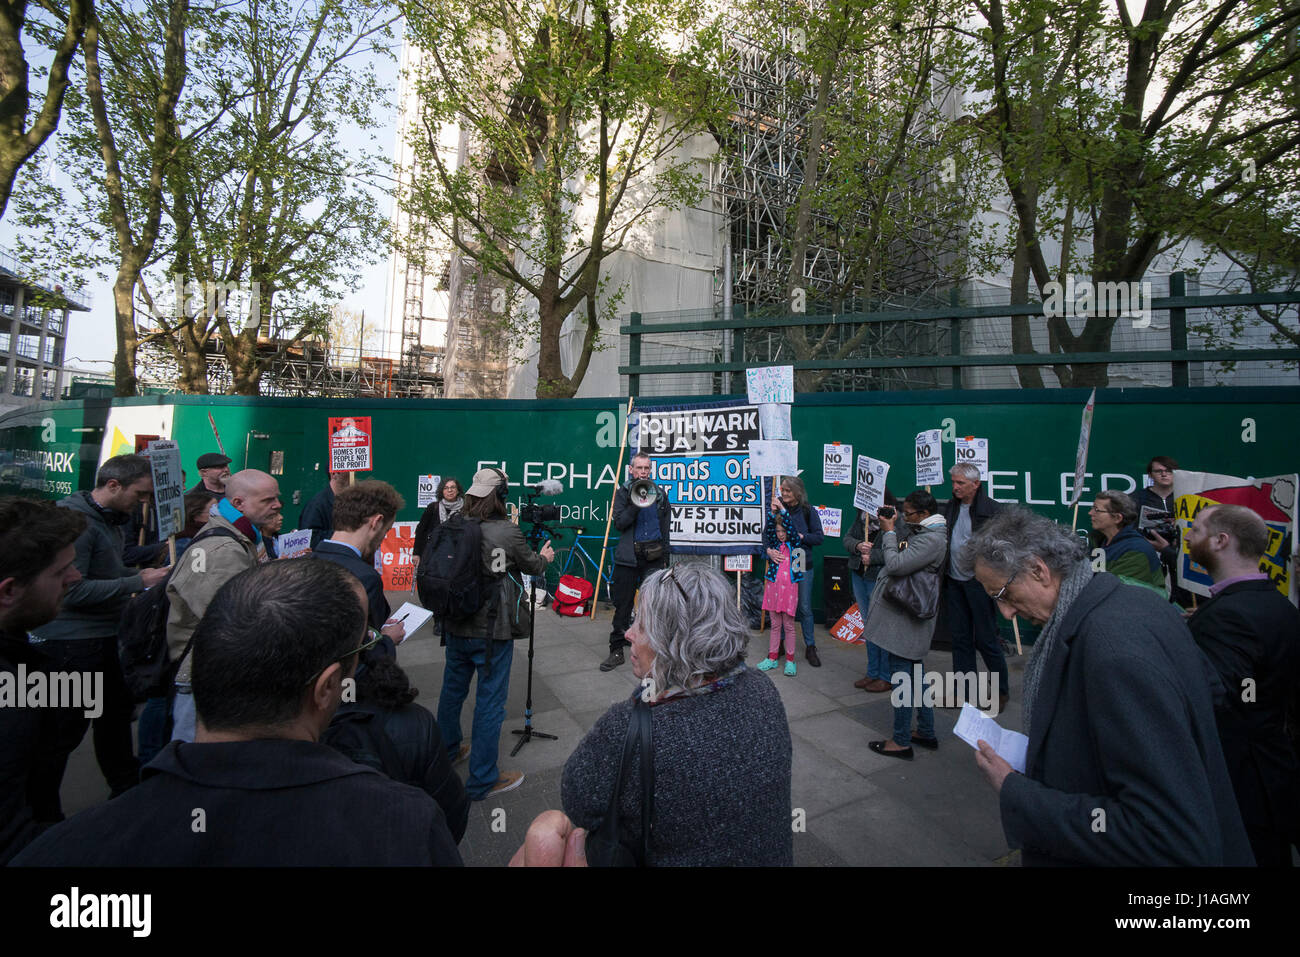 Elephant and Castle, London, UK. 19th Apr, 2017. Protestors gather at the former council estate at Elephant & Castle, which was demolished by developers who want to rebrand the site ‘Elephant Park’.  A new report by Transparency International, looking at the site, finds “the number of South Gardens units sold abroad is 51 out of 51 properties, as per Land Registry documents”. Credit: Mike Kear/Alamy Live News Stock Photo